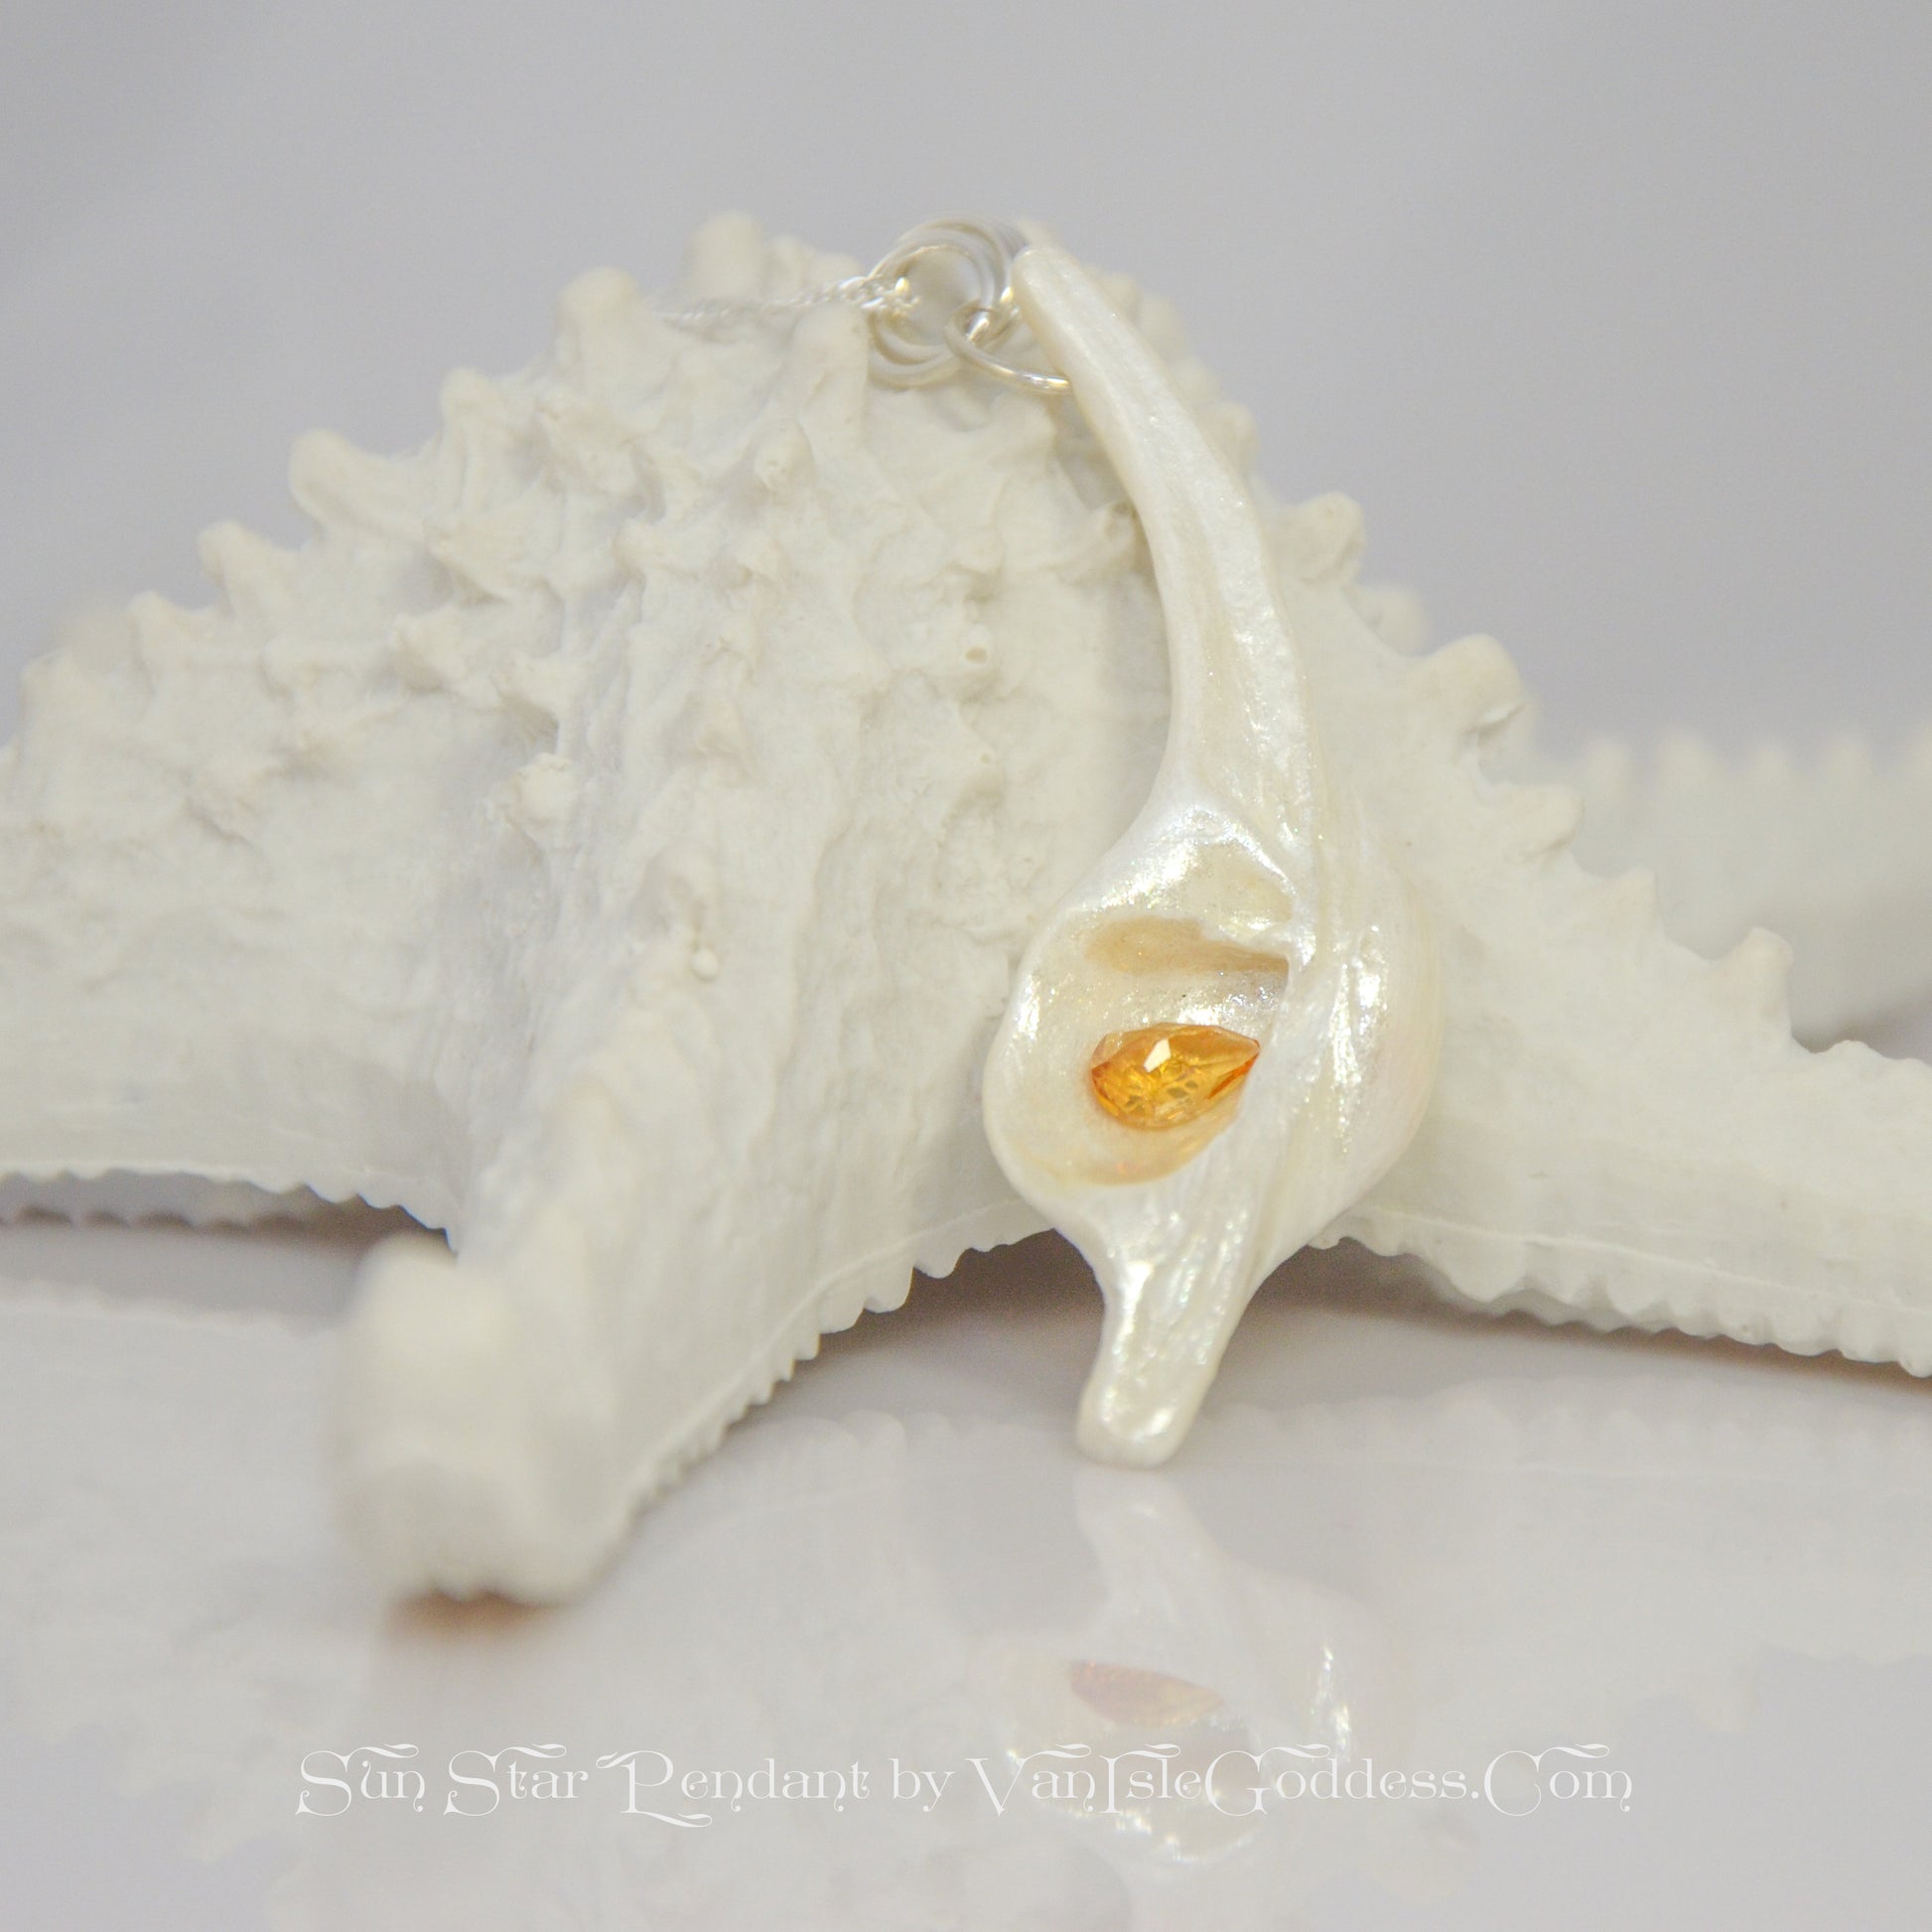 Sun Star natural seashell pendant with a beautiful pear shaped rose cut Citrine. The pendant rests on a starfish. The words on the bottom of the image say: Sun Star pendant by Van Isle Goddess dot com